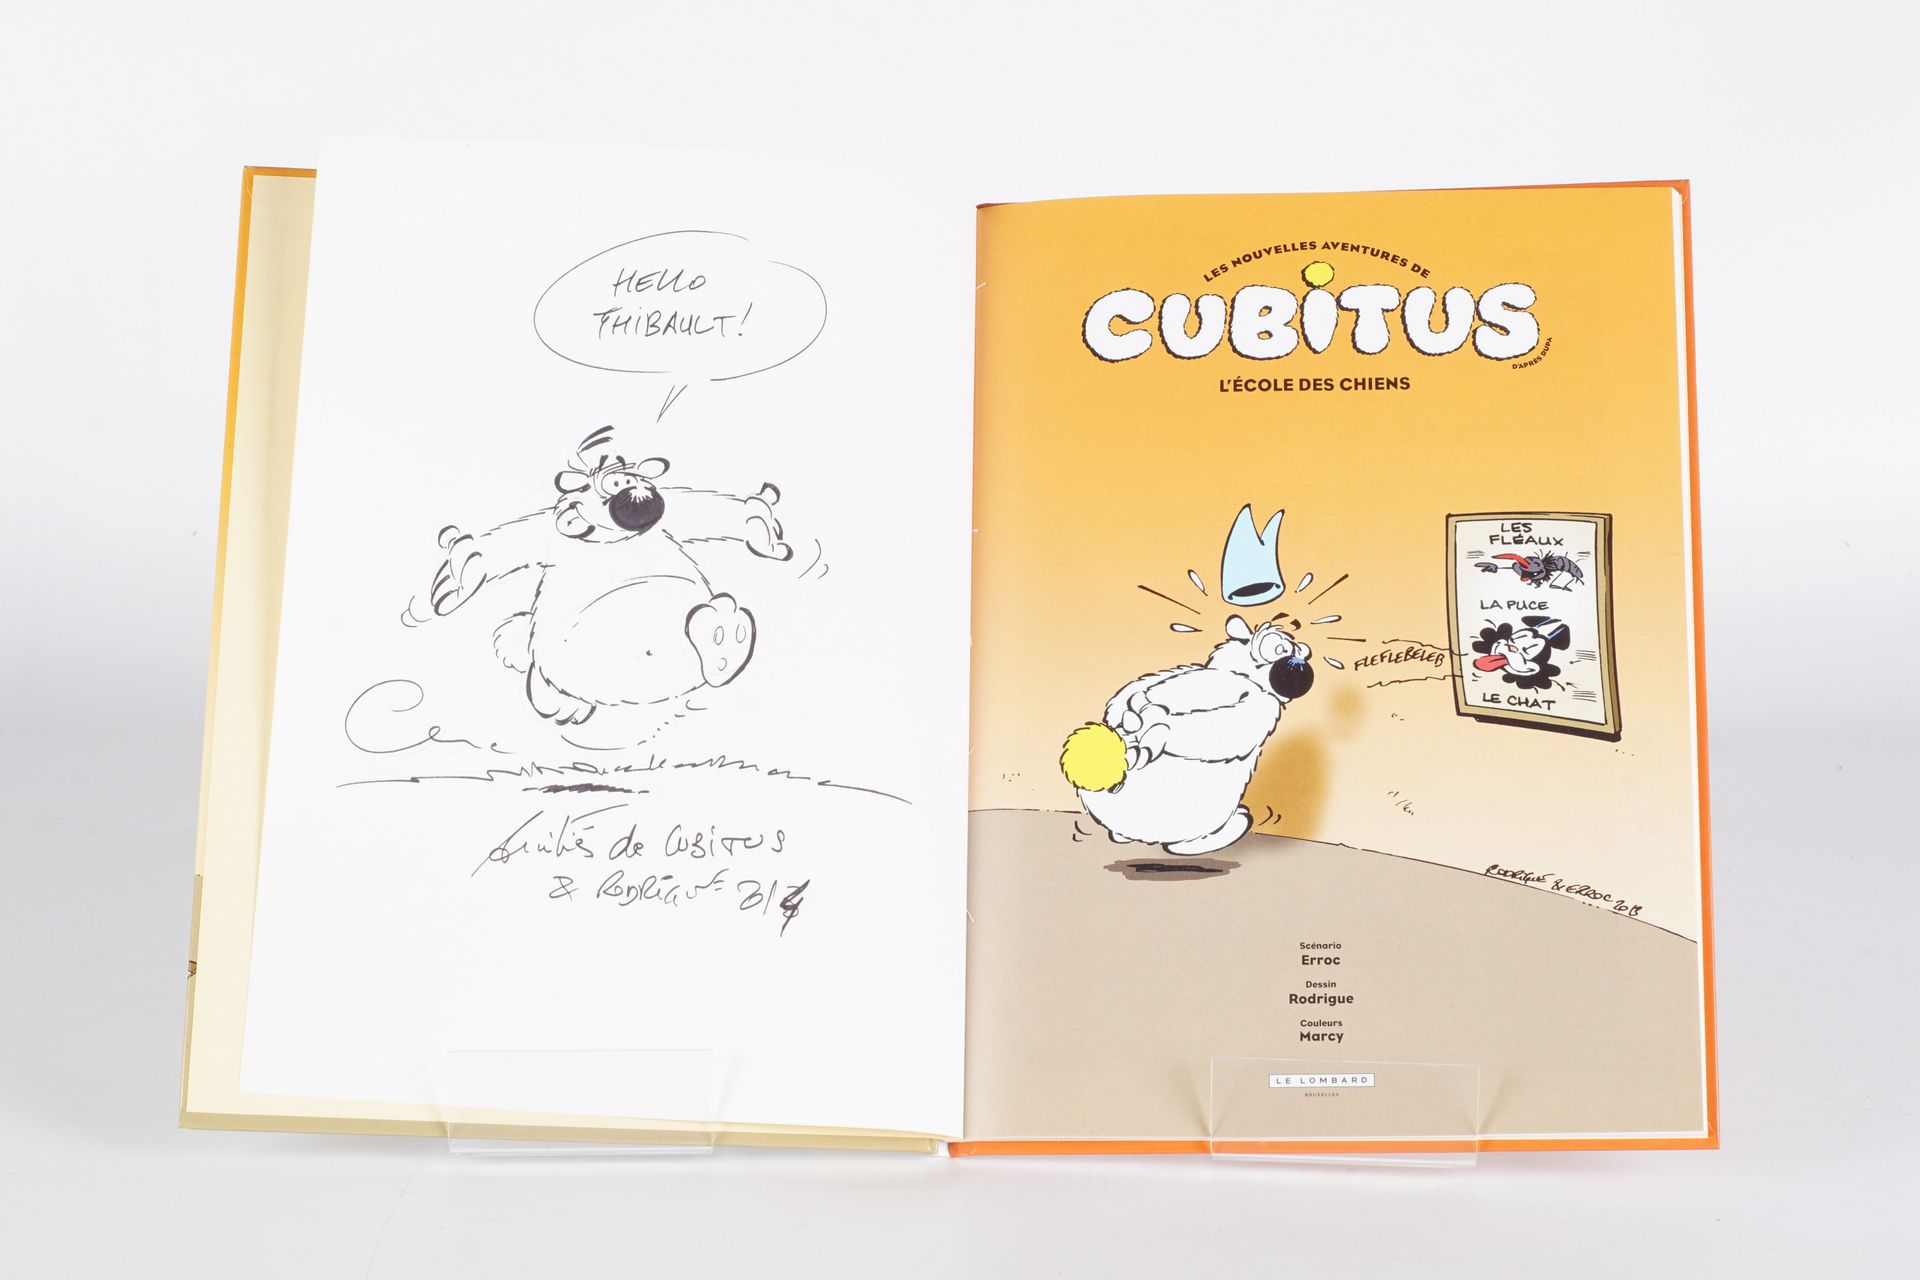 Collectifs Set of 4 albums in EO, signed and dedicated by RODRIGUE "Cubitus en p&hellip;